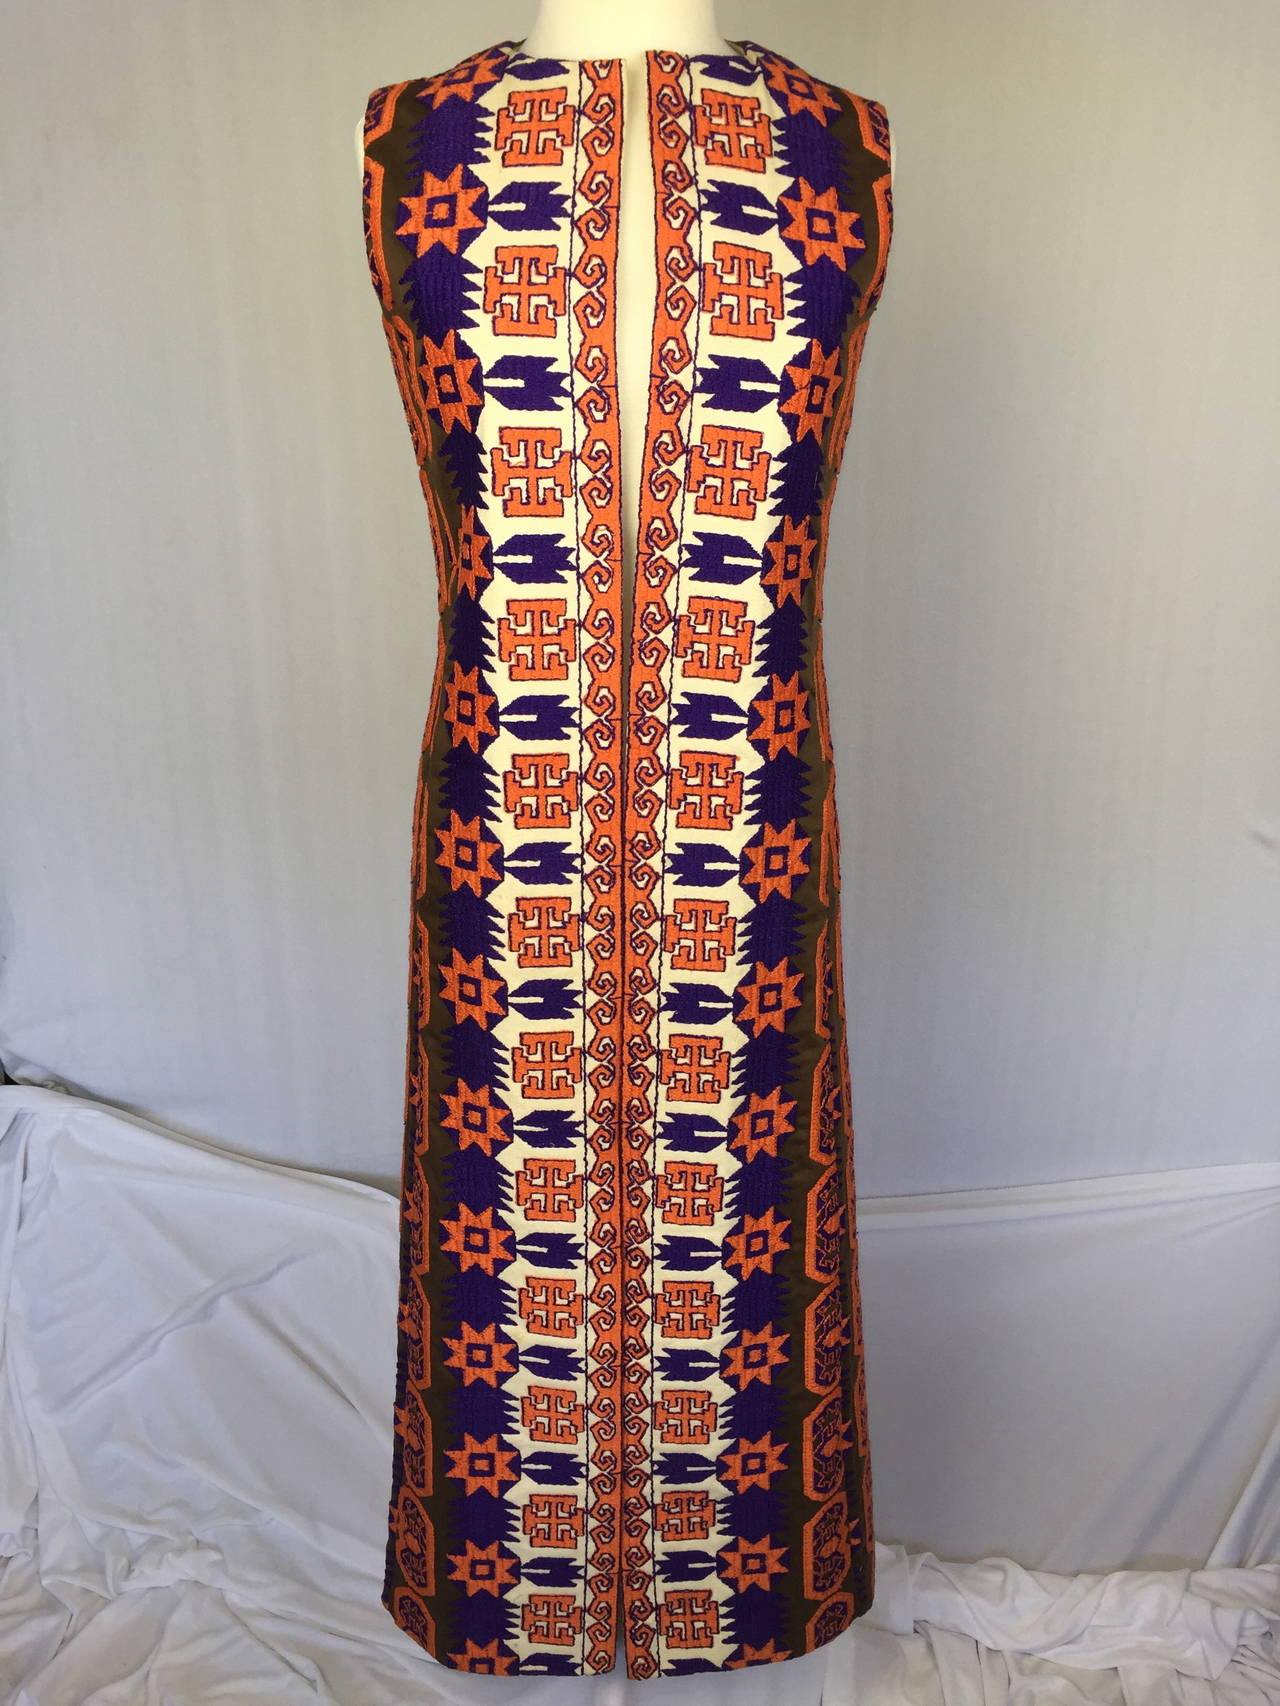 Early 1970's Calvin Klein maxi vest made of heavy, stiff, brown cotton/silk faille and off white canvas embellished all over with an amazing abstract design of orange and purple embroideries inspired by early Native American textiles.  There is